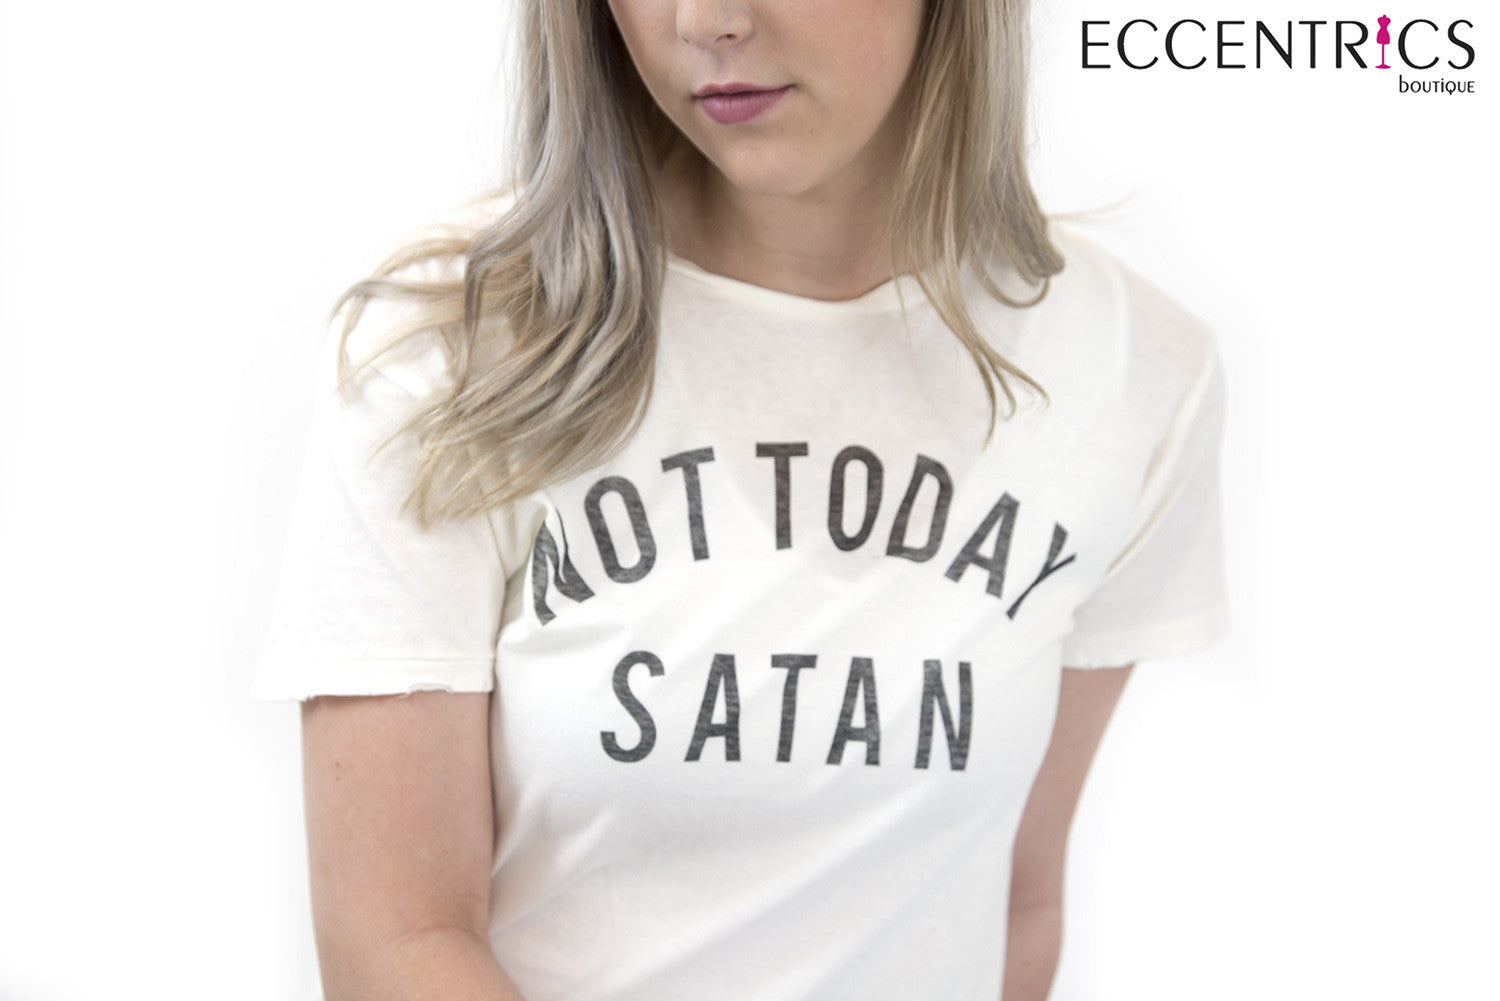 6 ways to style Christian graphic tees at Eccentrics Boutique